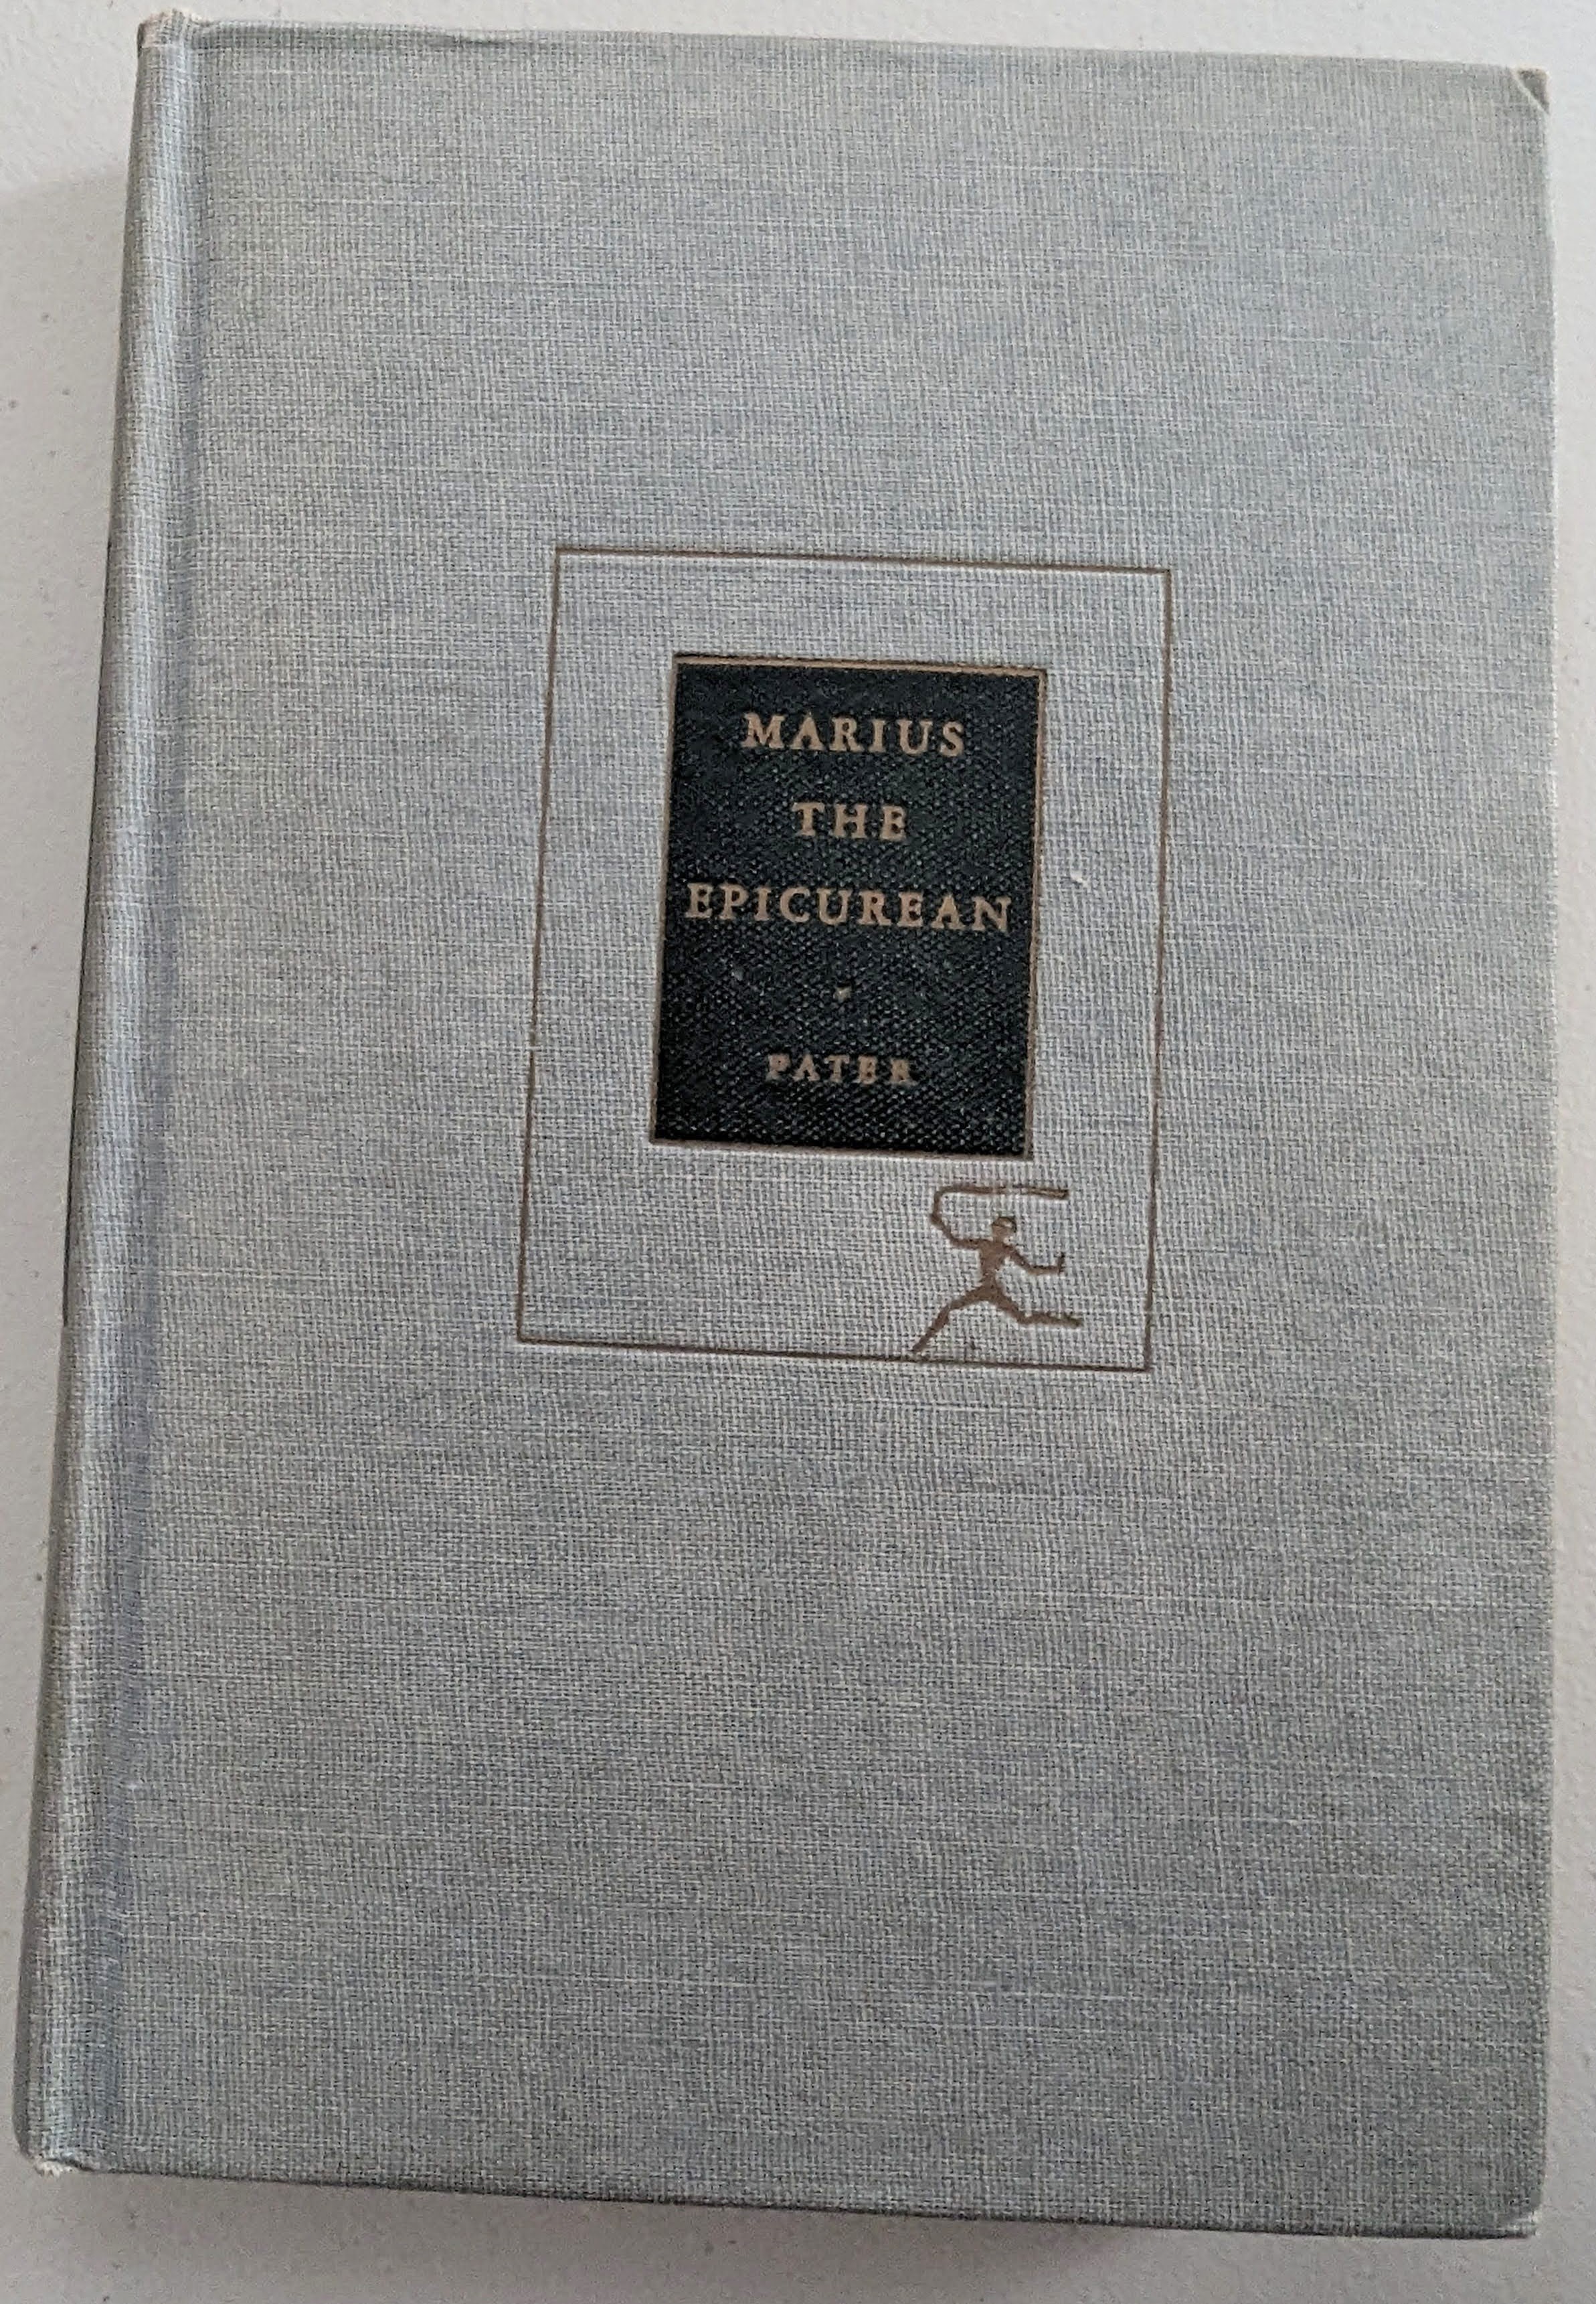 Walter Pater: Marius The Epicurean (Hardcover, 1939, The Modern Library)